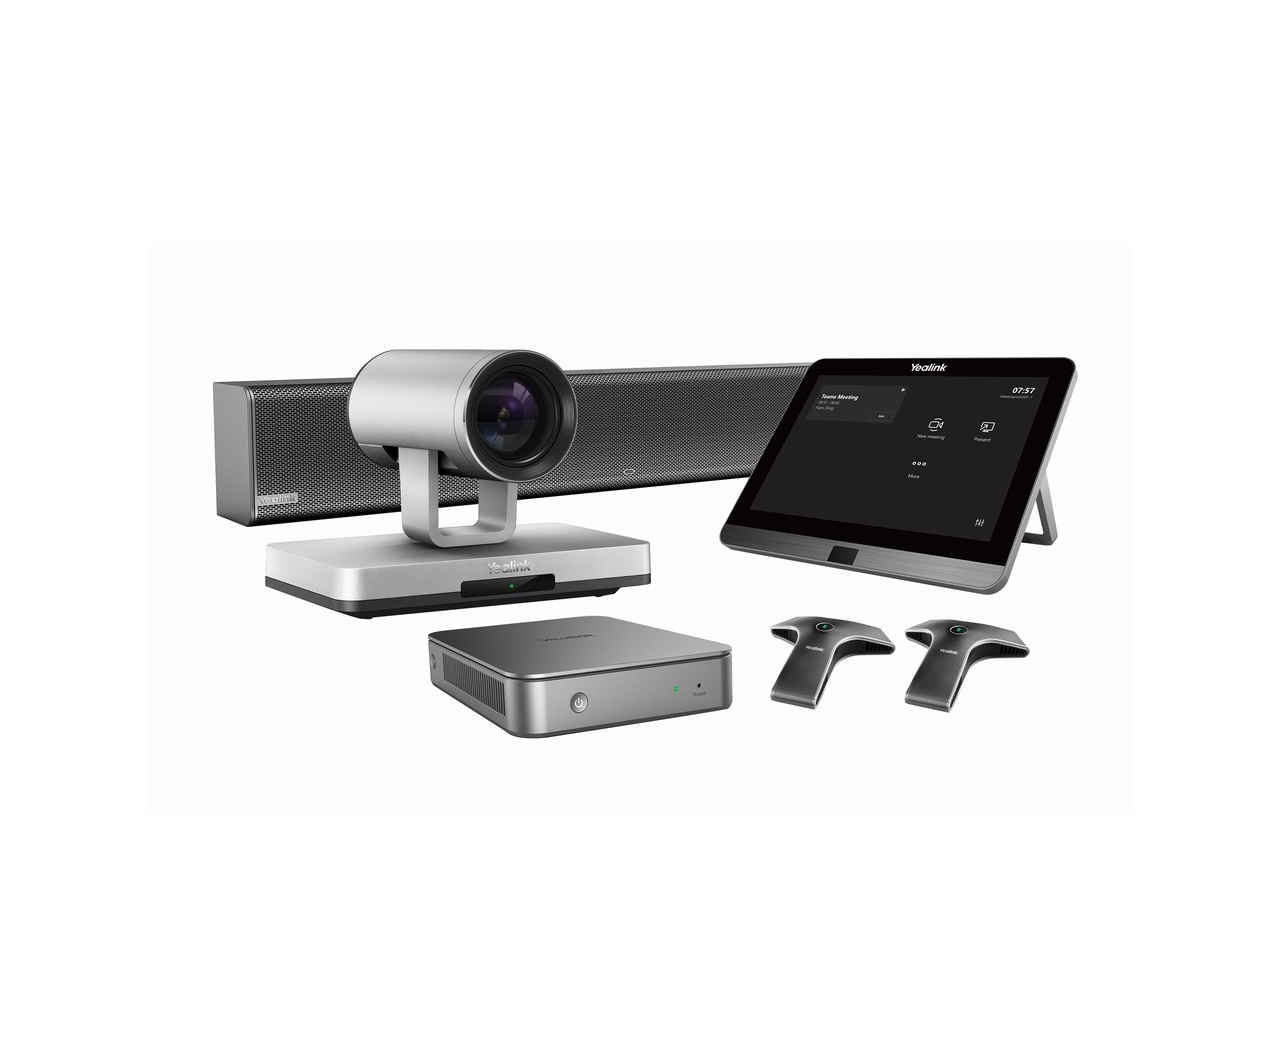 YEALINK VIDEO CONFERENCING SYSTEM MVC800 II-C2-210-0